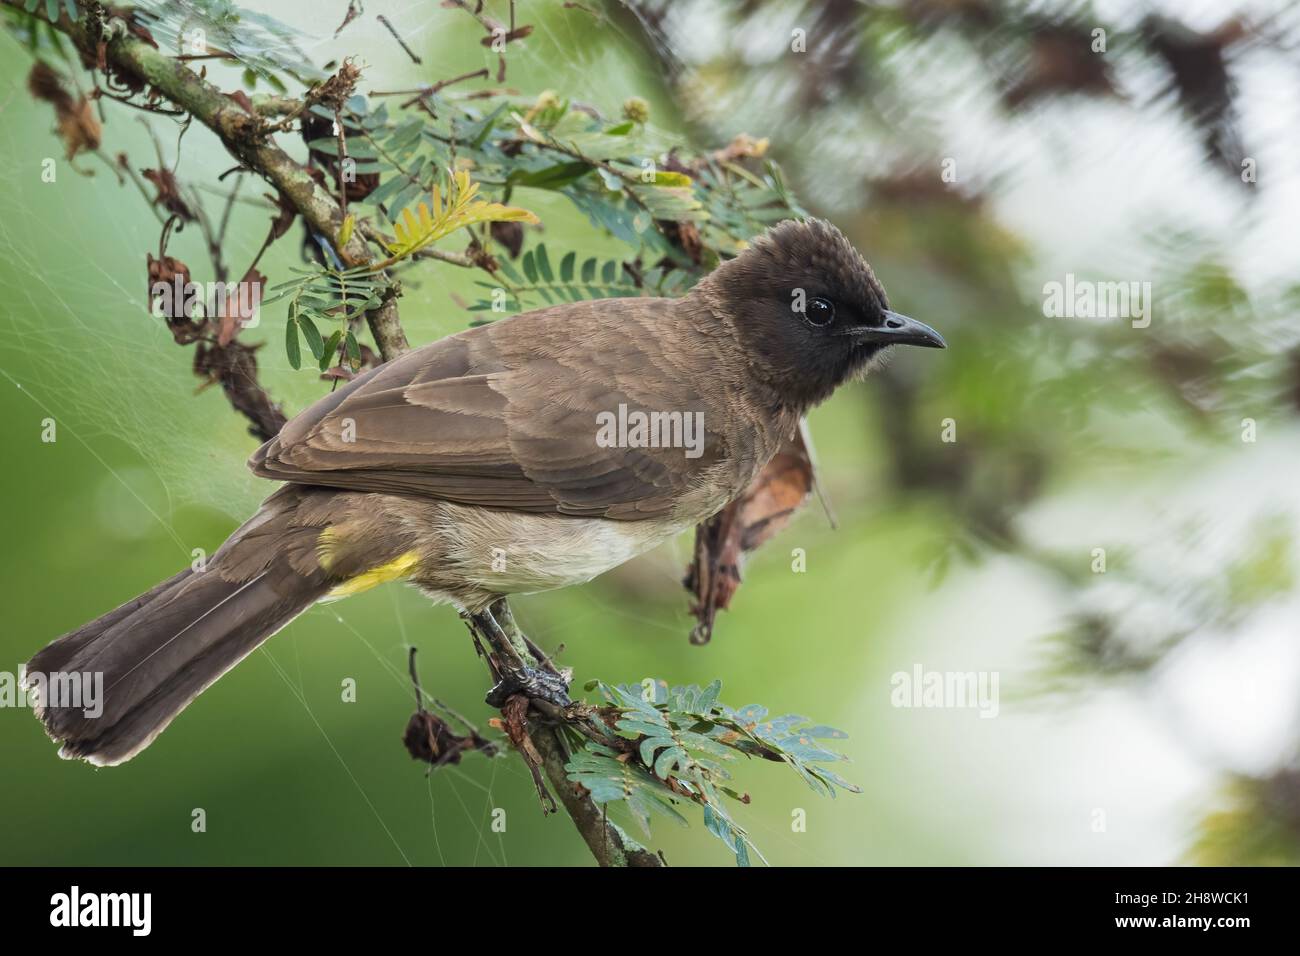 Dark-capped Bulbul - Pycnonotus tricolor, beautiful common perching bird from African gardens and woodlands, Entebbe, Uganda. Stock Photo